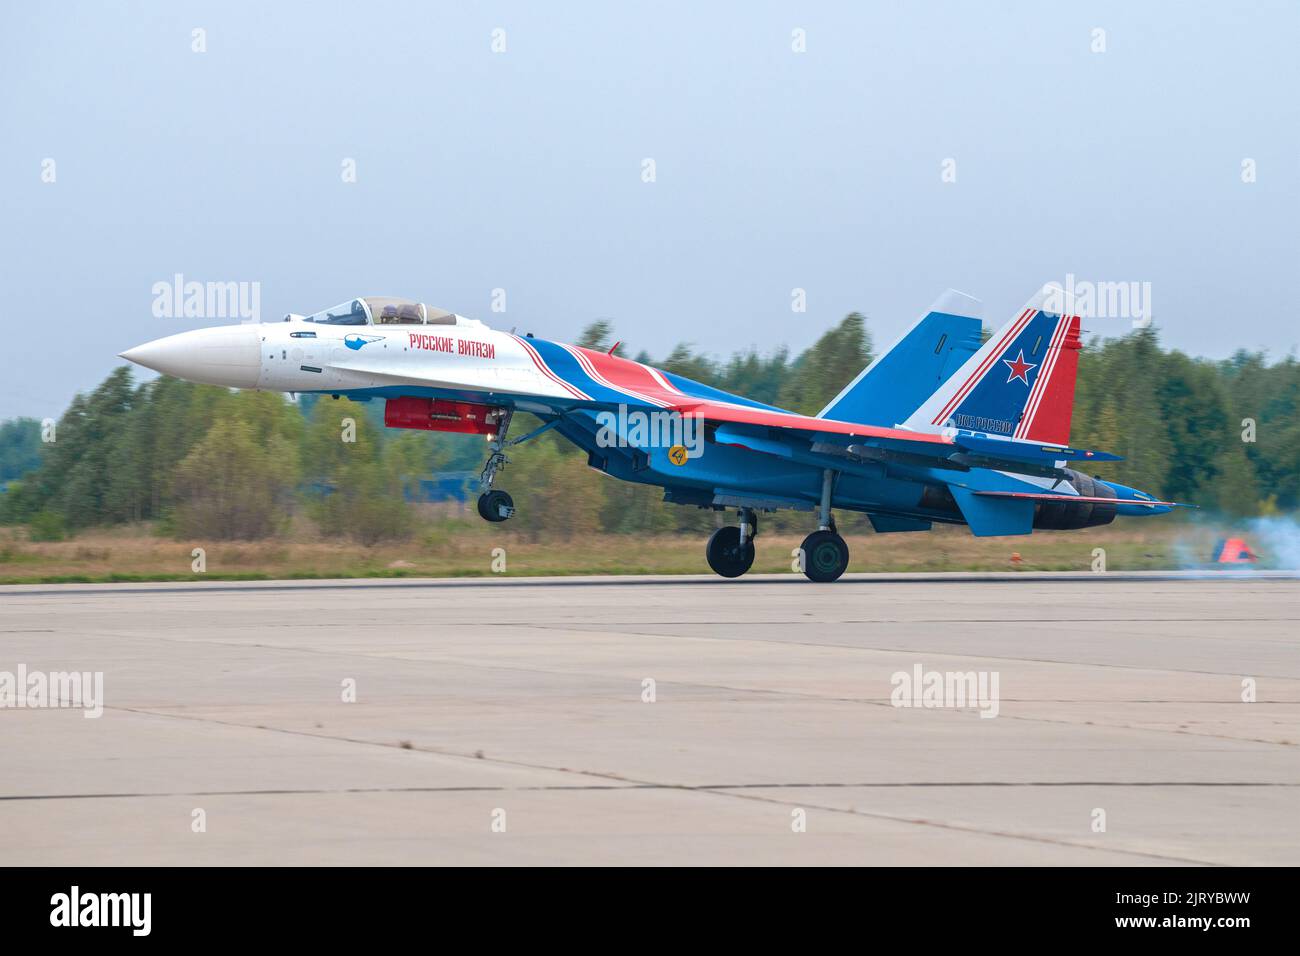 KUBINKA, RUSSIA - AUGUST 20, 2022: The Su-35S fighter of the Russian aerobatic team of 'Russian Knights' on landing after the flight program Stock Photo